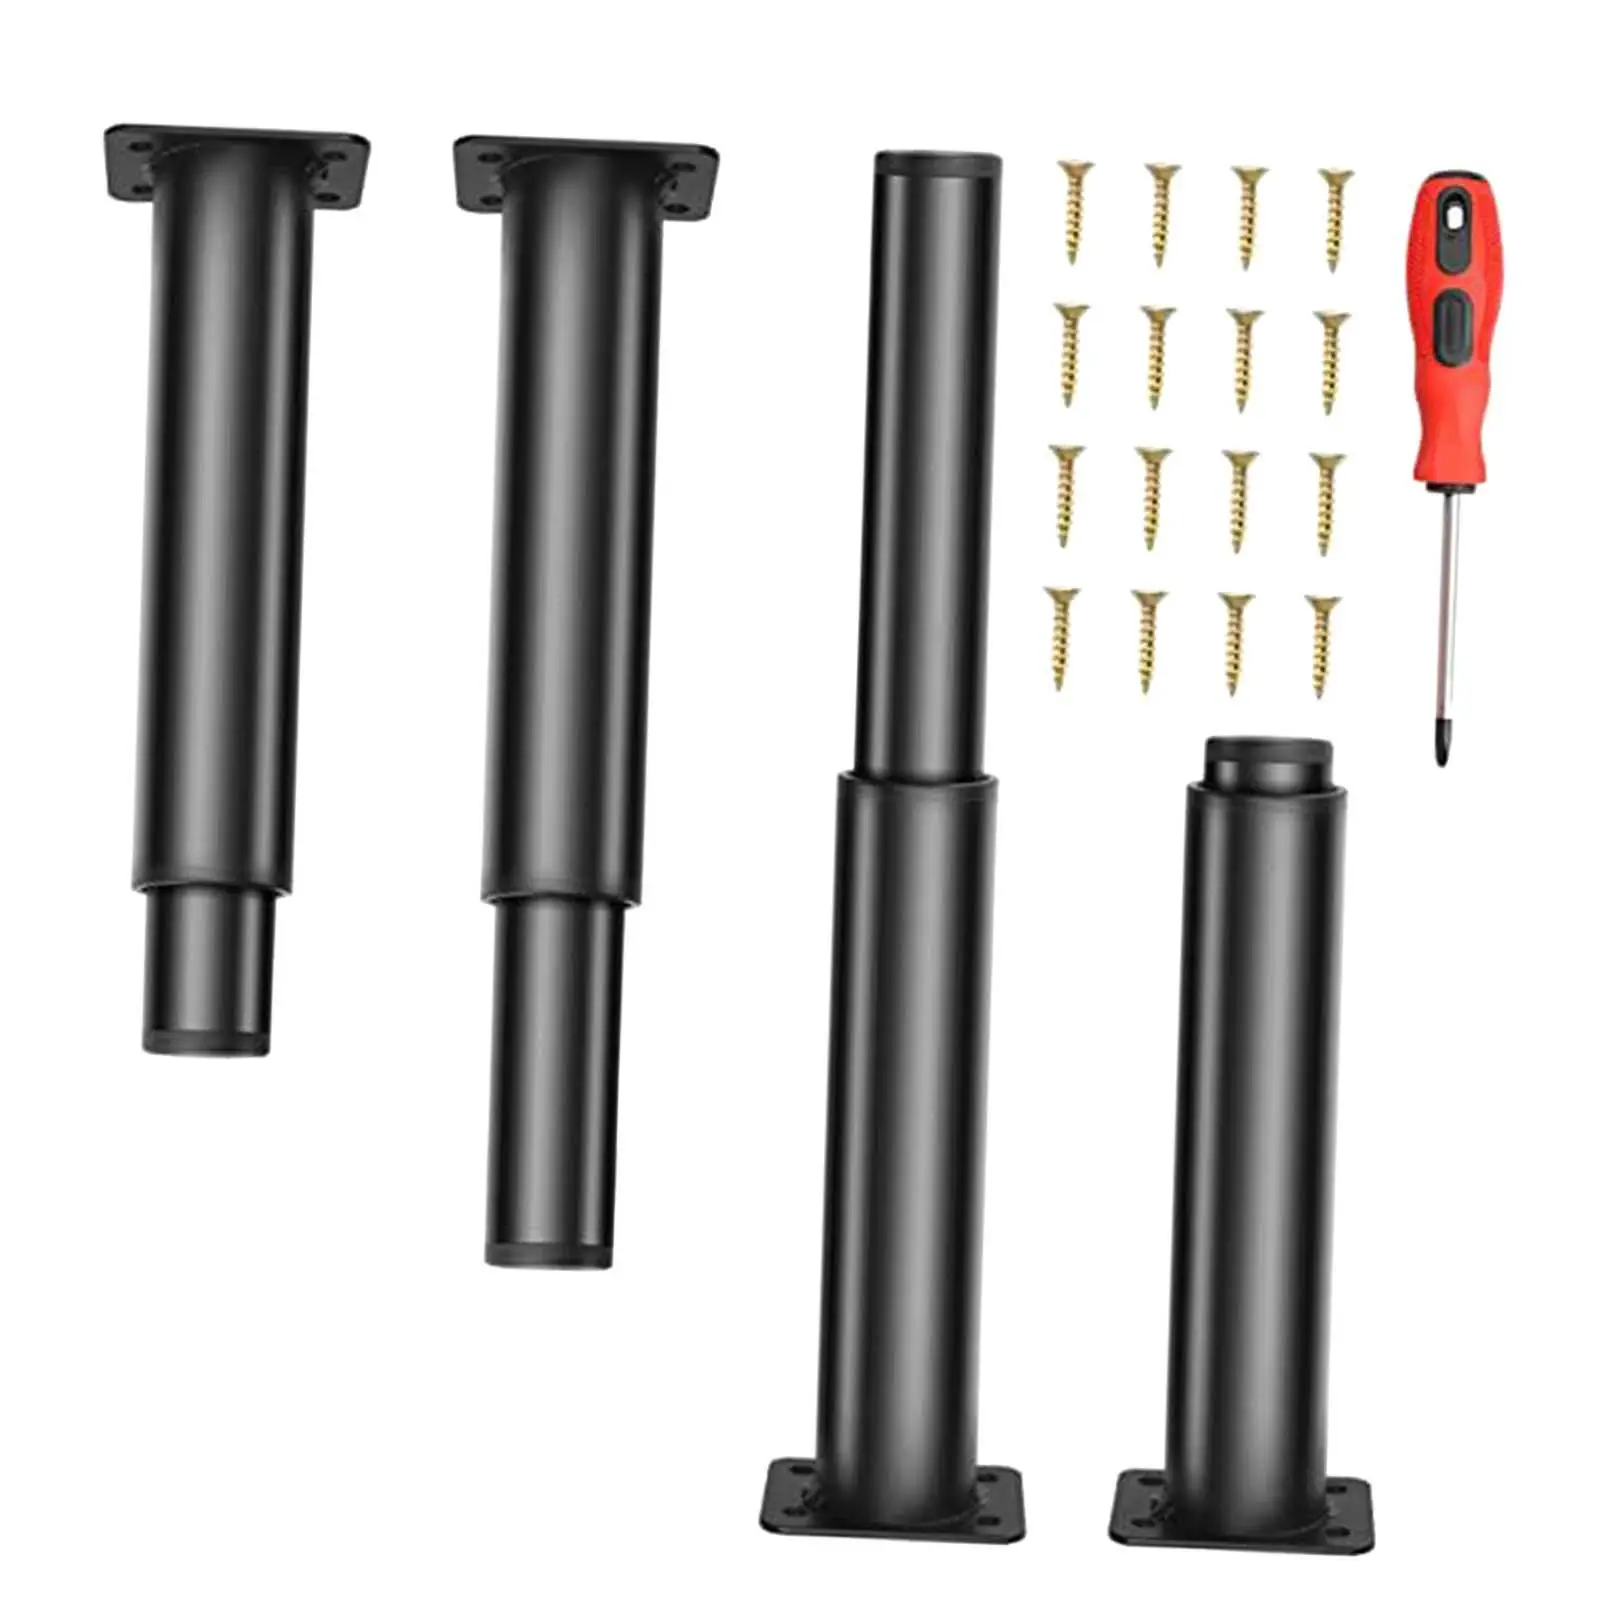 4 Pieces Metal Adjustable Leg for Table Black for TV Stand Desks Coffee Table